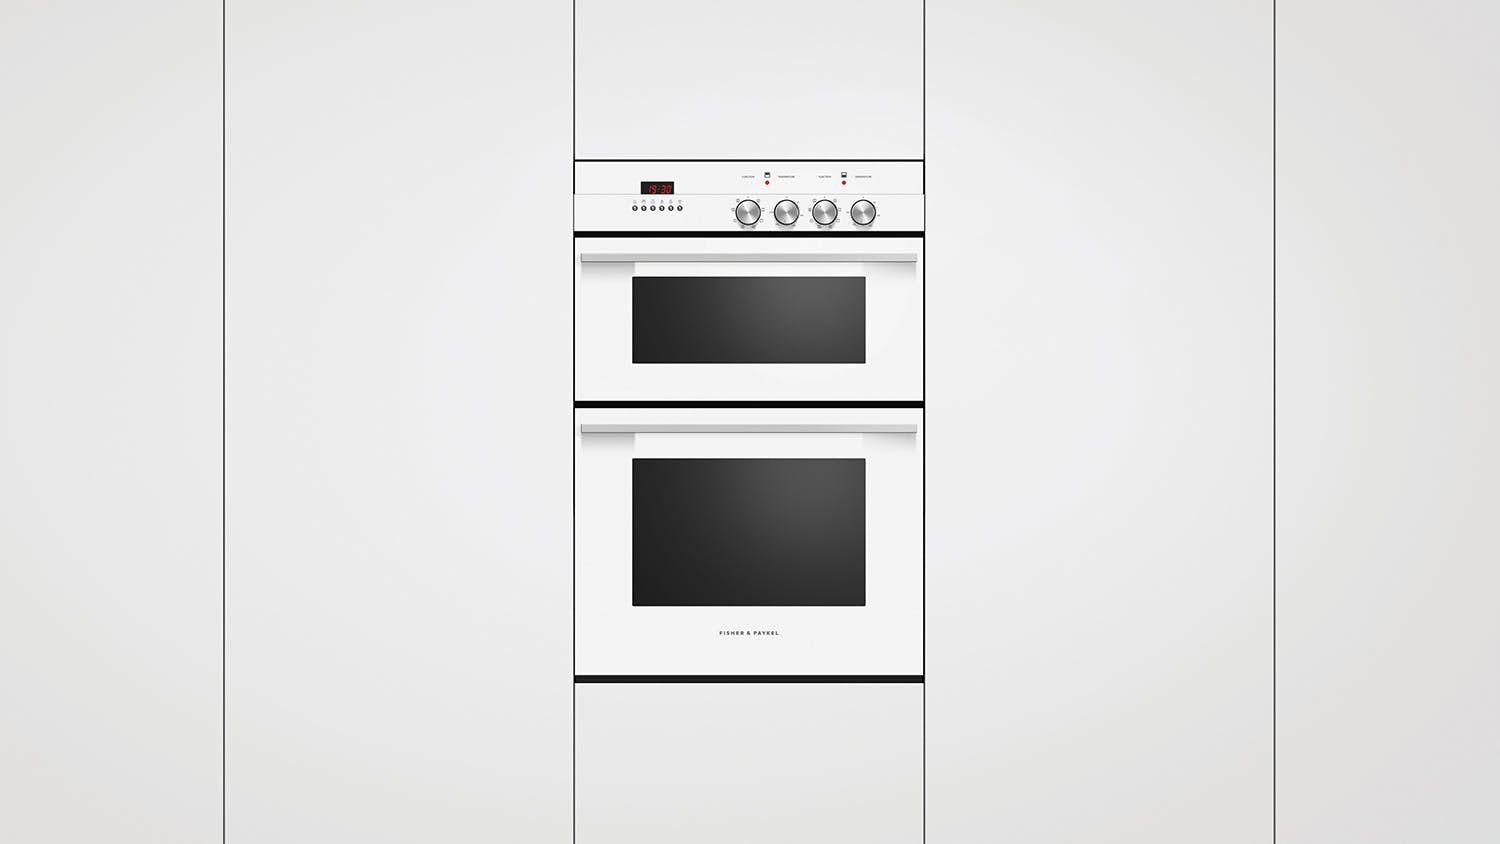 Fisher & Paykel 60cm 7 + 7 Function Built-In Double Oven - White (Series 5/OB60B77CEW3)